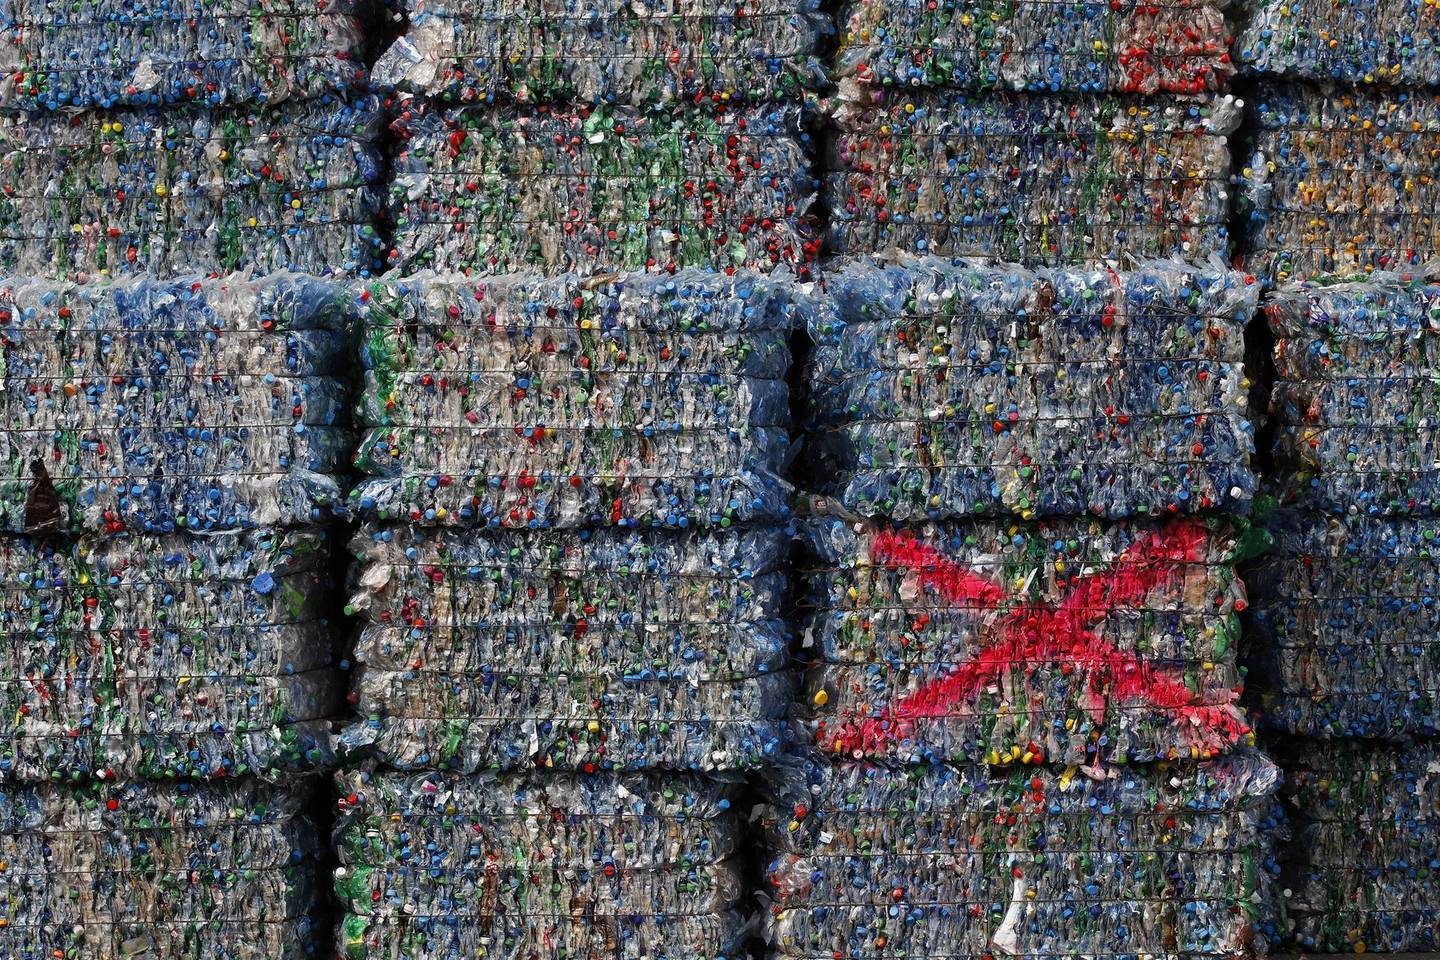 Crushed plastic bottles and containers are bundled into bundles ready for recycling at Poly Recycling AG's new factory in Bielten, Switzerland, Wednesday, April 3, 2019. The economics of plastic recycling have suddenly been upended due to China's import ban and the cheap U.S. oil used to make virgin plastic. Photographer: Stefan Wermuth/Bloomberg